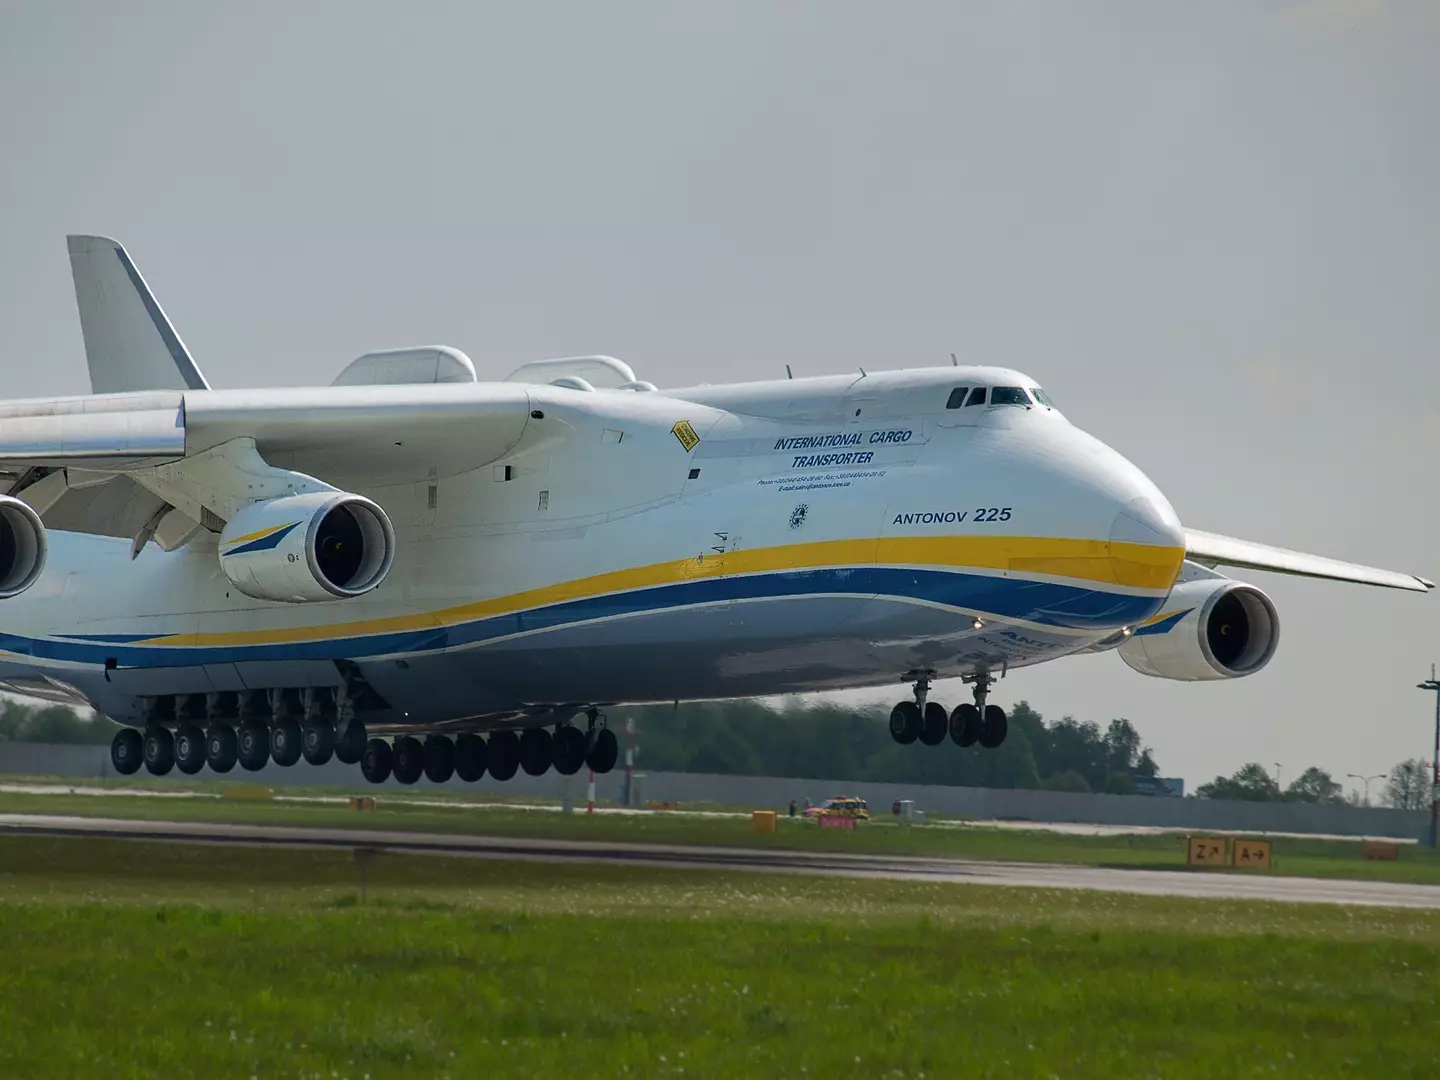 Russian forces reportedly destroyed the largest plane in the world.